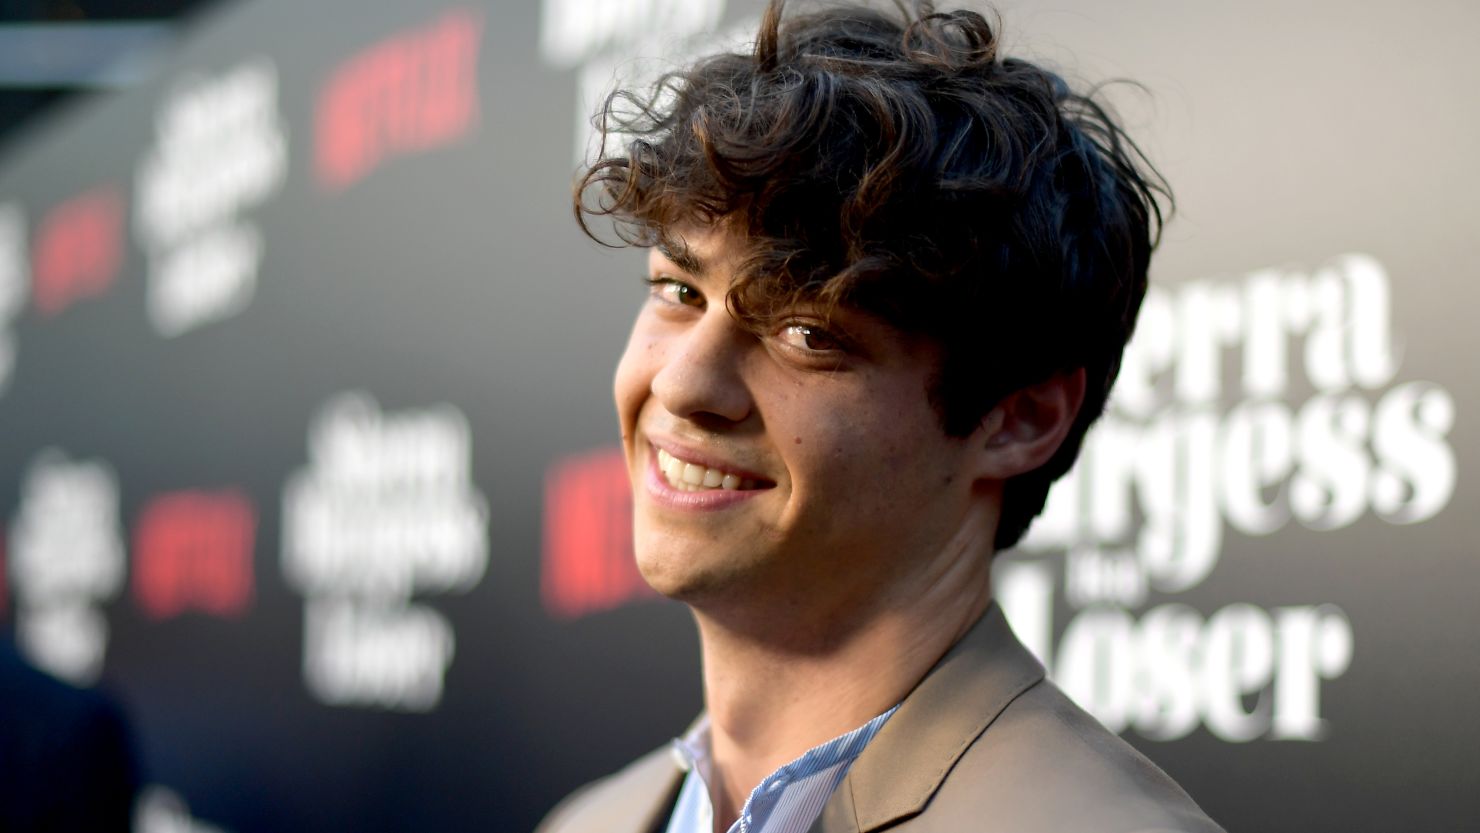 HOLLYWOOD, CA - AUGUST 30:  Noah Centineo attends the Los Angeles Premiere of the Netflix Film Sierra Burgess is a Loser at Arclight Hollywood on August 30, 2018 in Hollywood, California.  (Photo by Matt Winkelmeyer/Getty Images for Netflix)